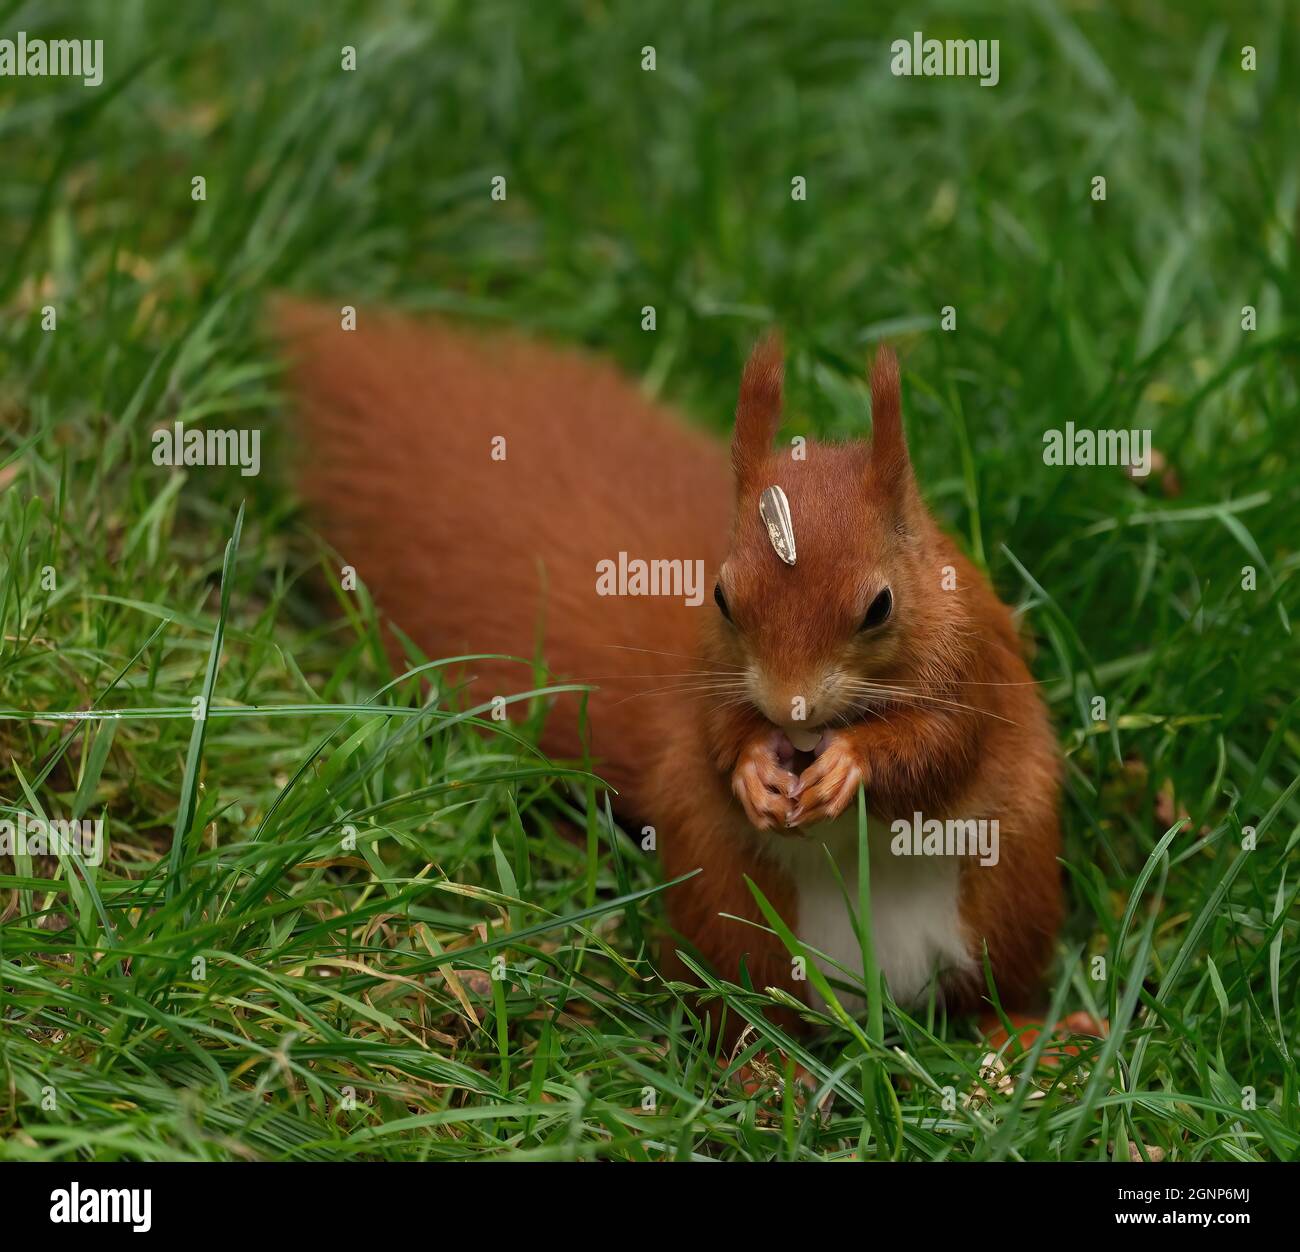 red squirrel sitting on ground Stock Photo